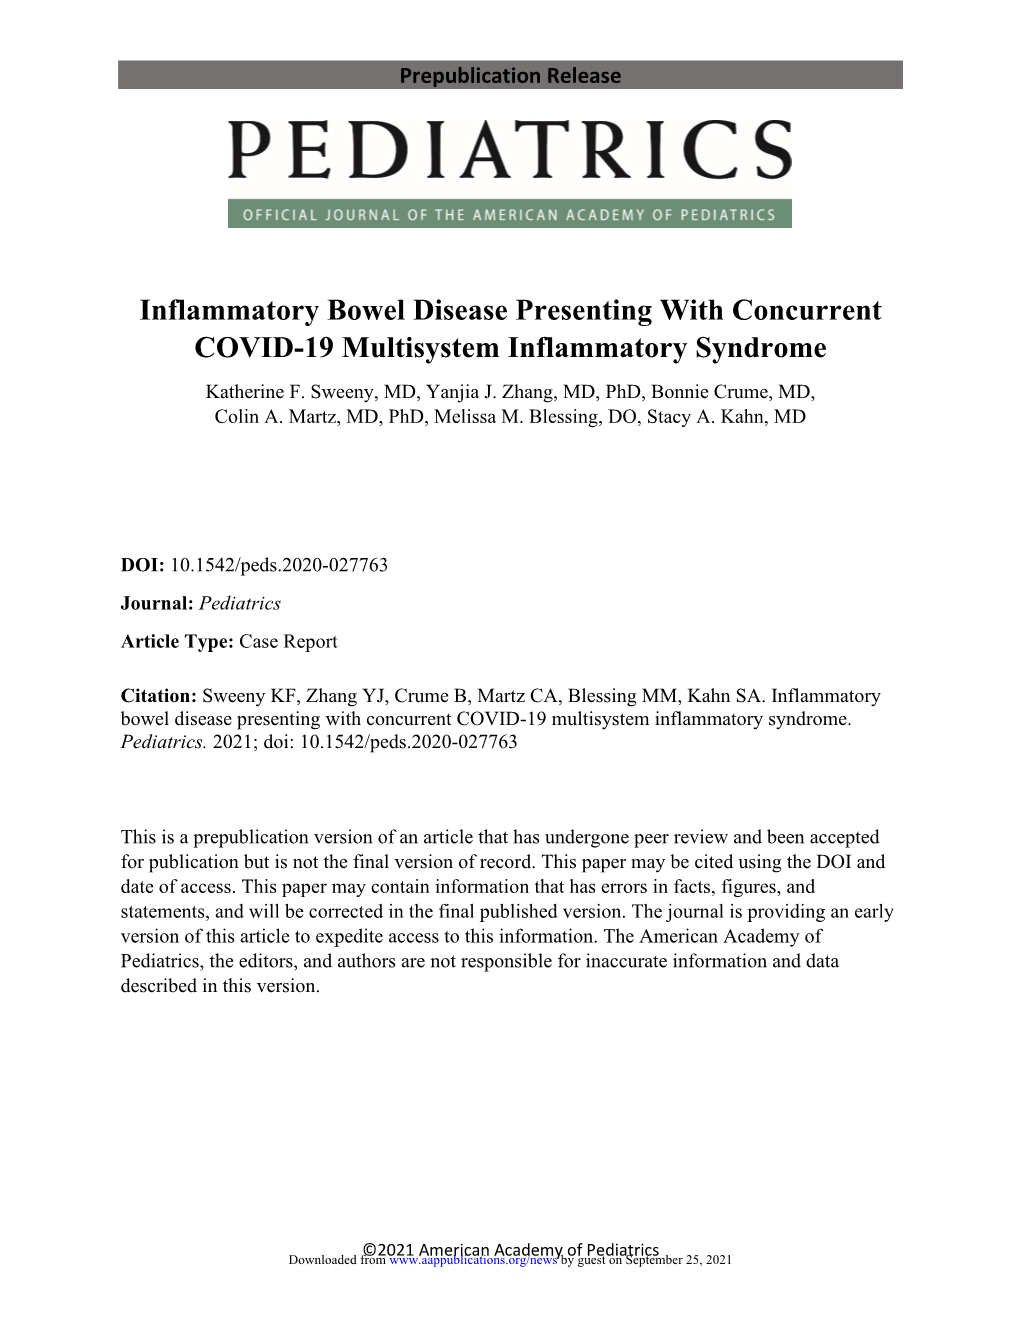 Inflammatory Bowel Disease Presenting with Concurrent COVID-19 Multisystem Inflammatory Syndrome Katherine F